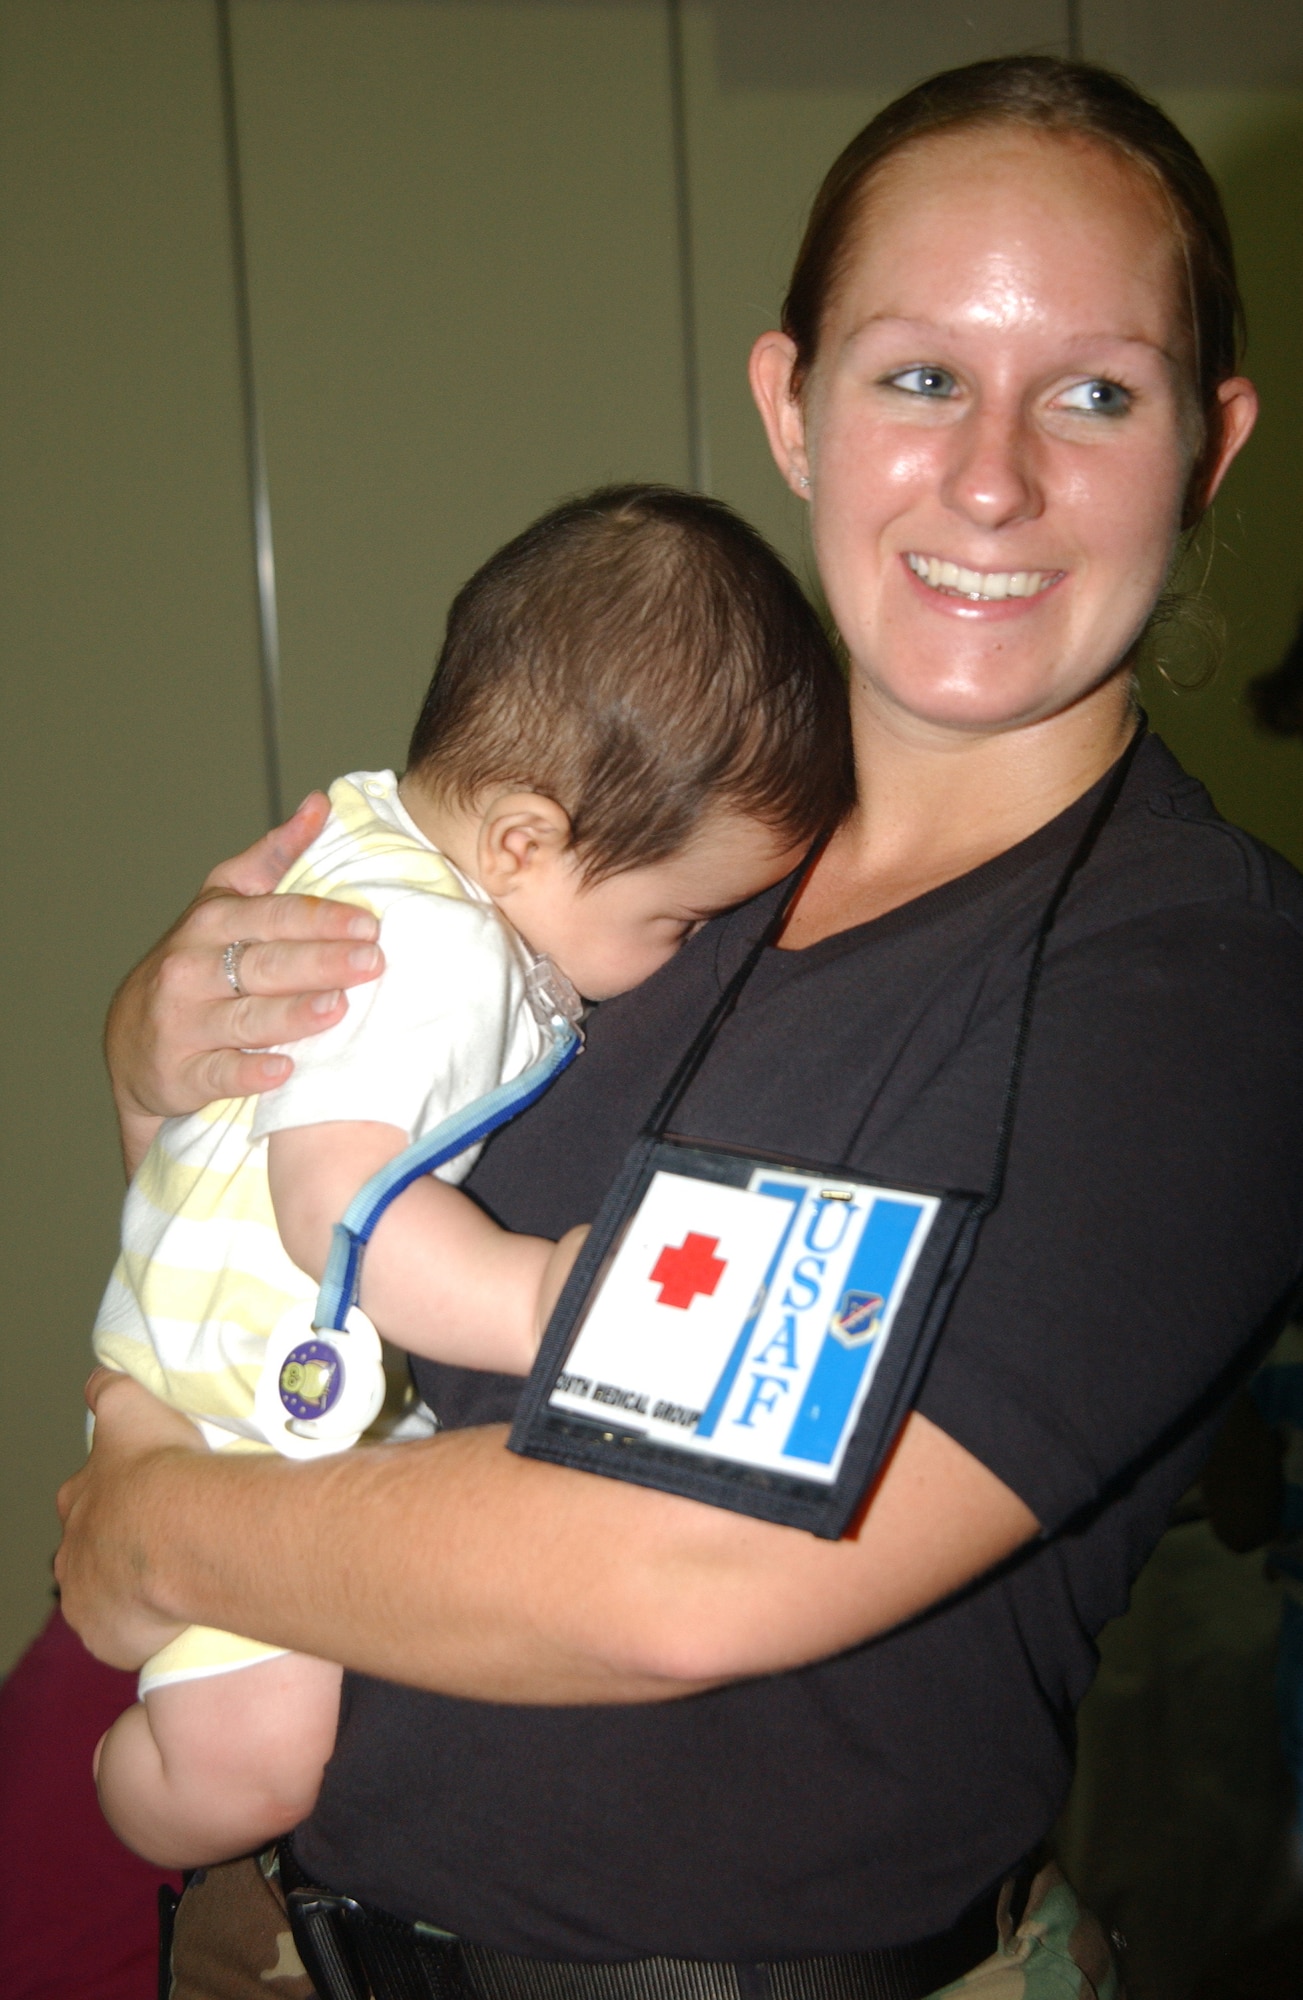 Incirlik Air Base Historical photo of Senior Airman Kylee Wright assists incoming families from Lebanon by holding a baby at incirlik Air Base, Turkey,2006.